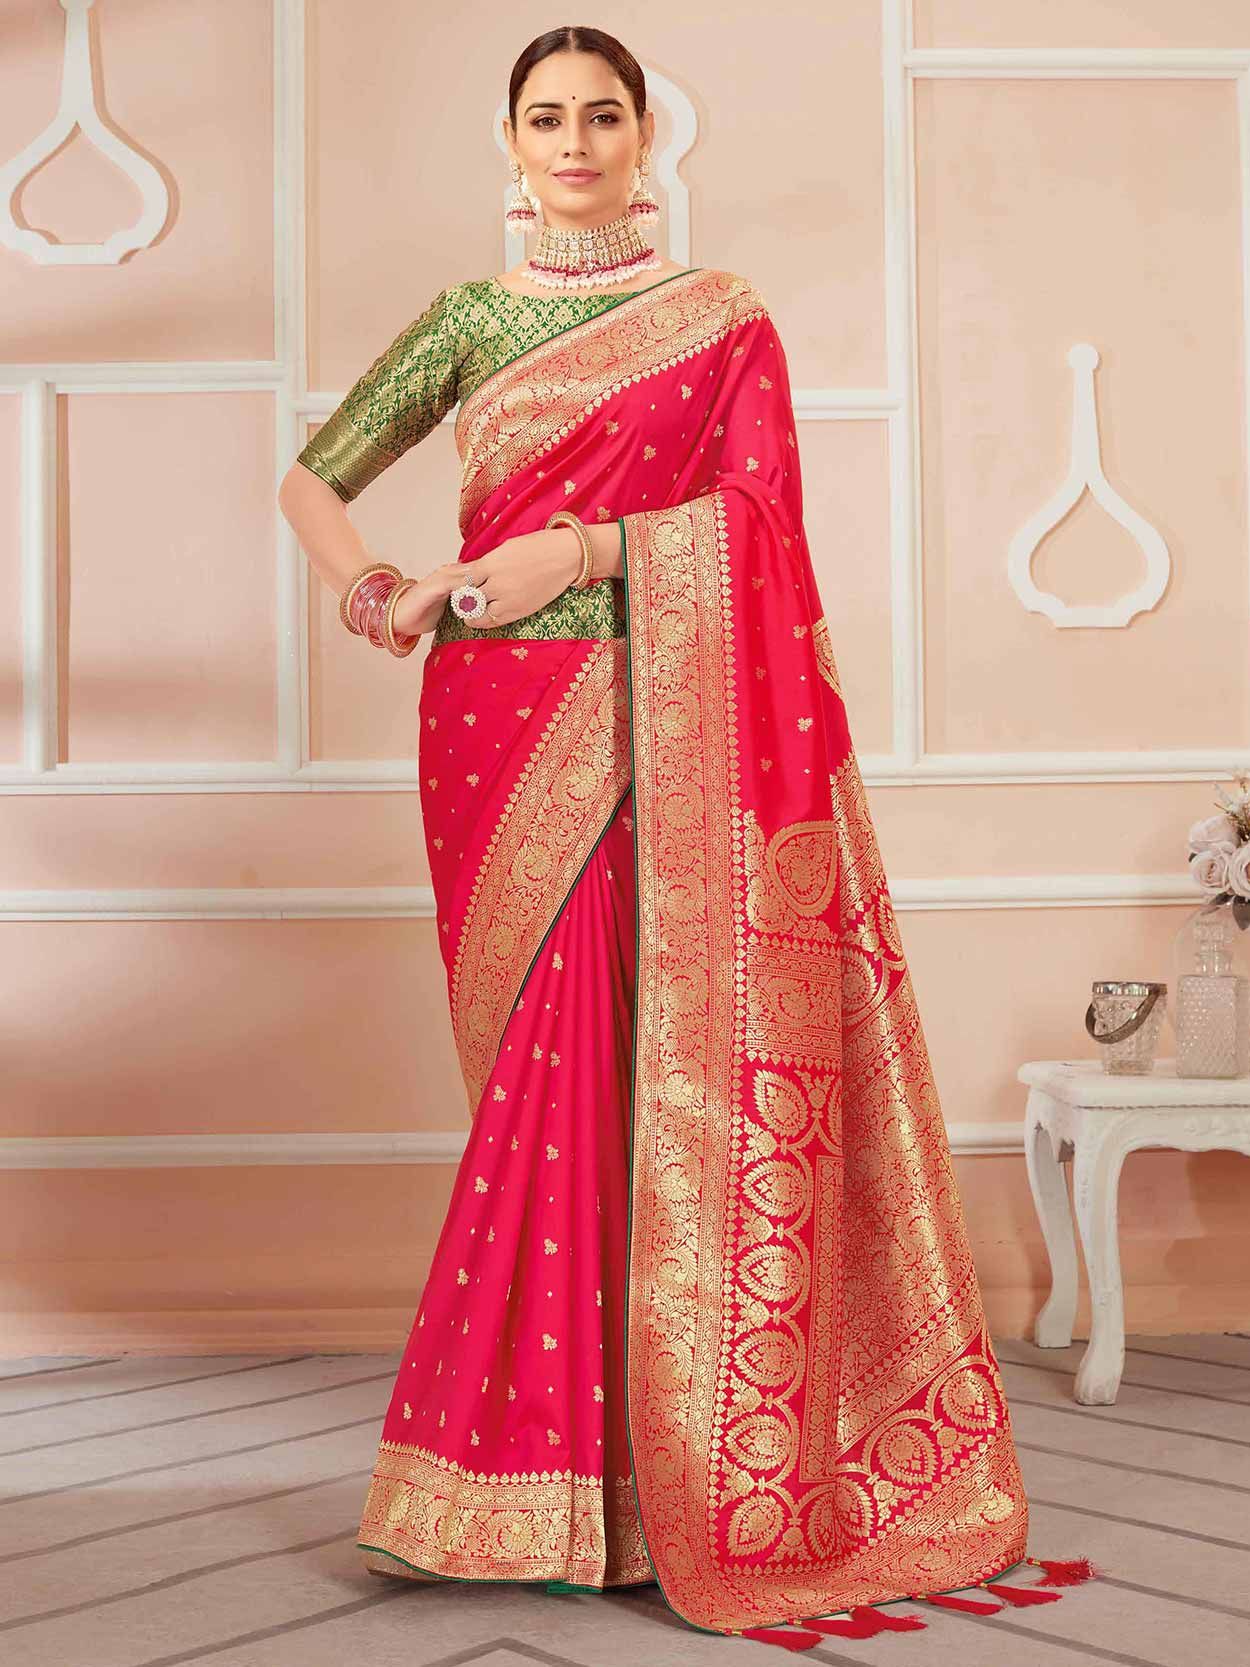 5 COLOURS YOU SHOULD OPT FOR WHILE SHOPPING FOR A WEDDING SAREE! - KALKI  Fashion Blog